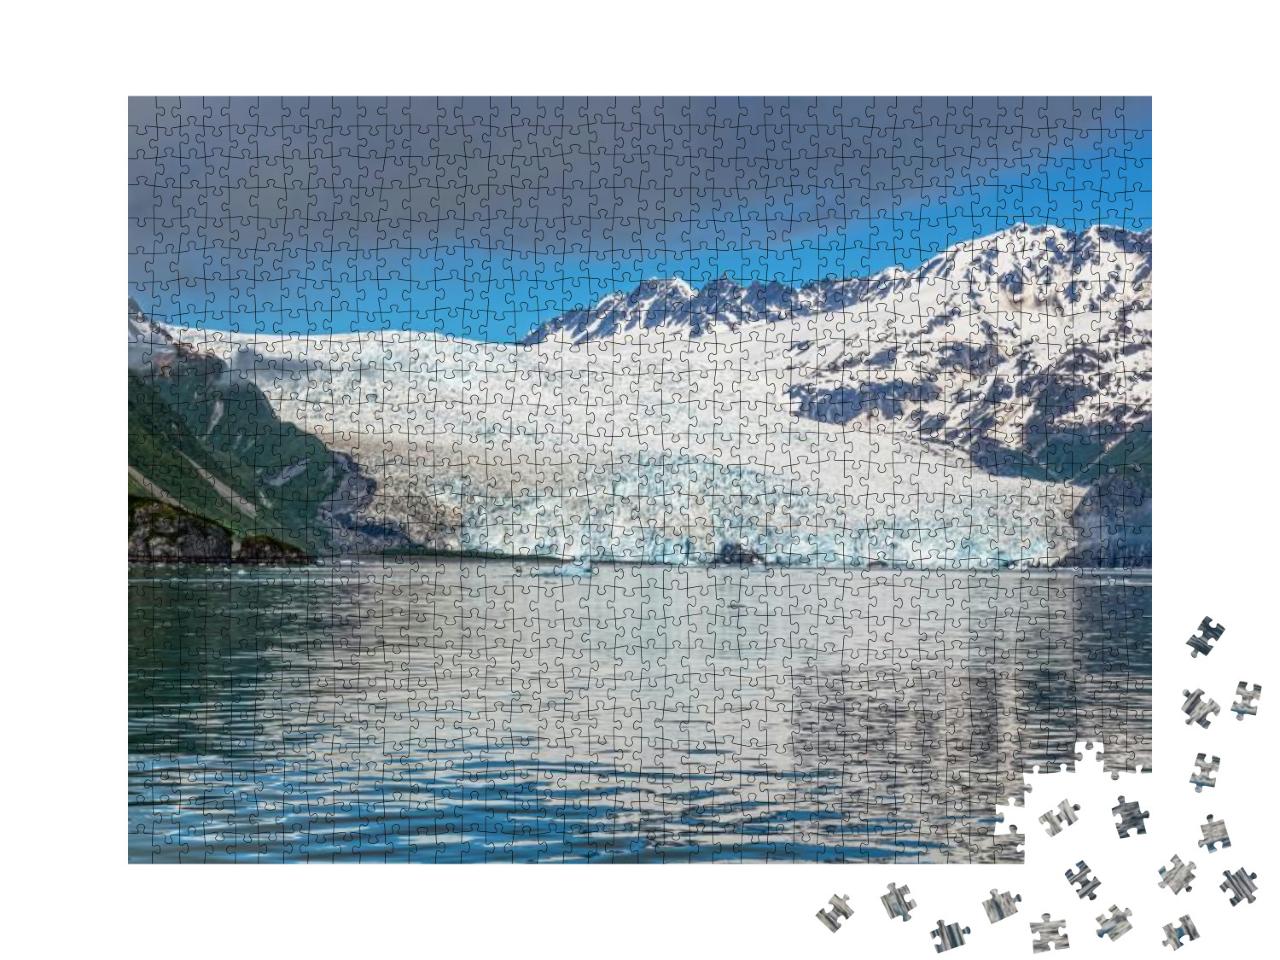 A Scenic View of the Aialik Glacier in Kenai Fjords Natio... Jigsaw Puzzle with 1000 pieces